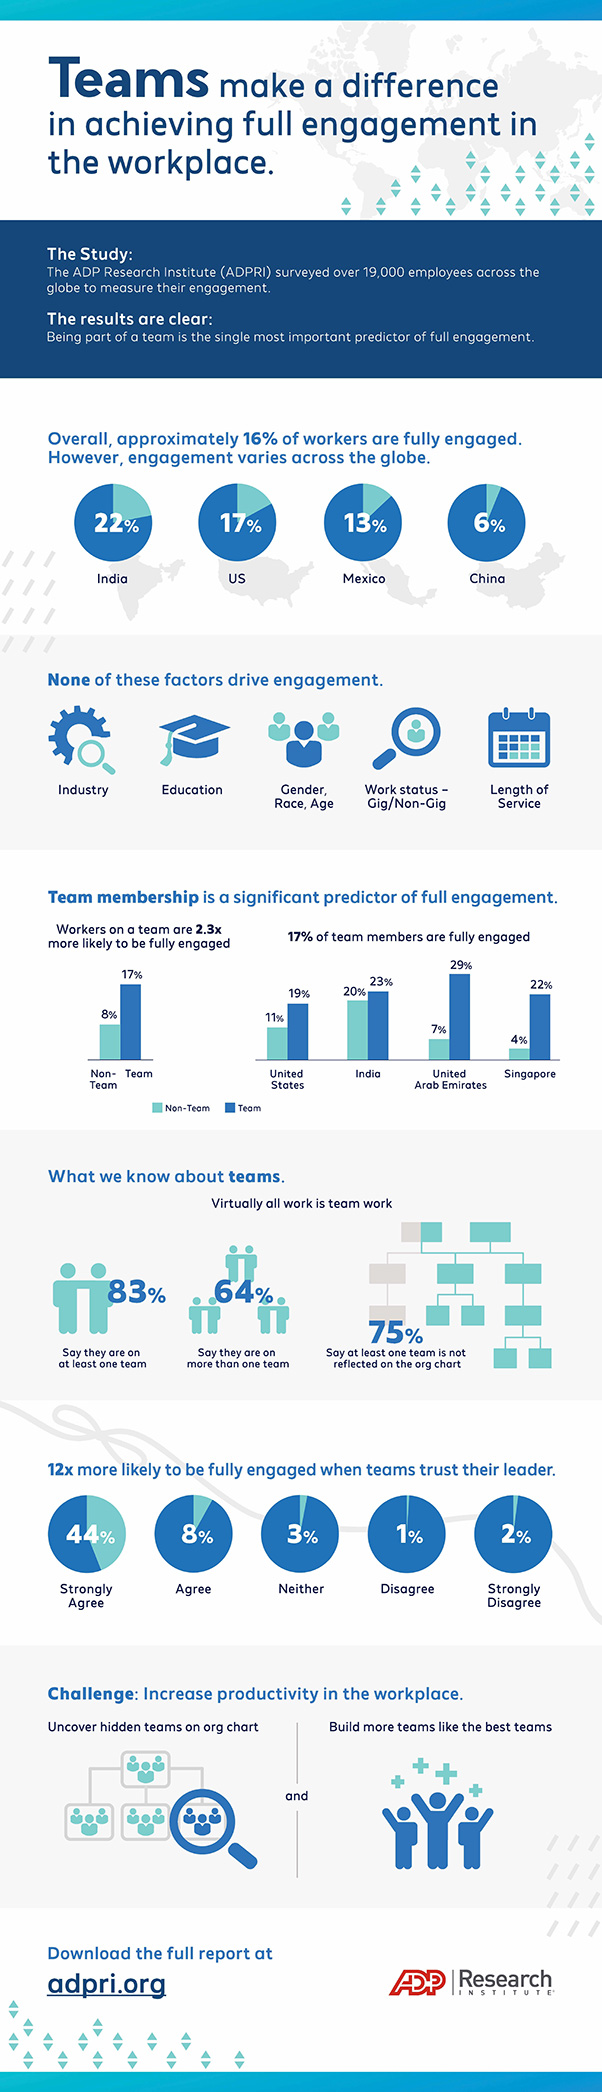 Infographic Focus on Teams Drives Engagement in the Workplace